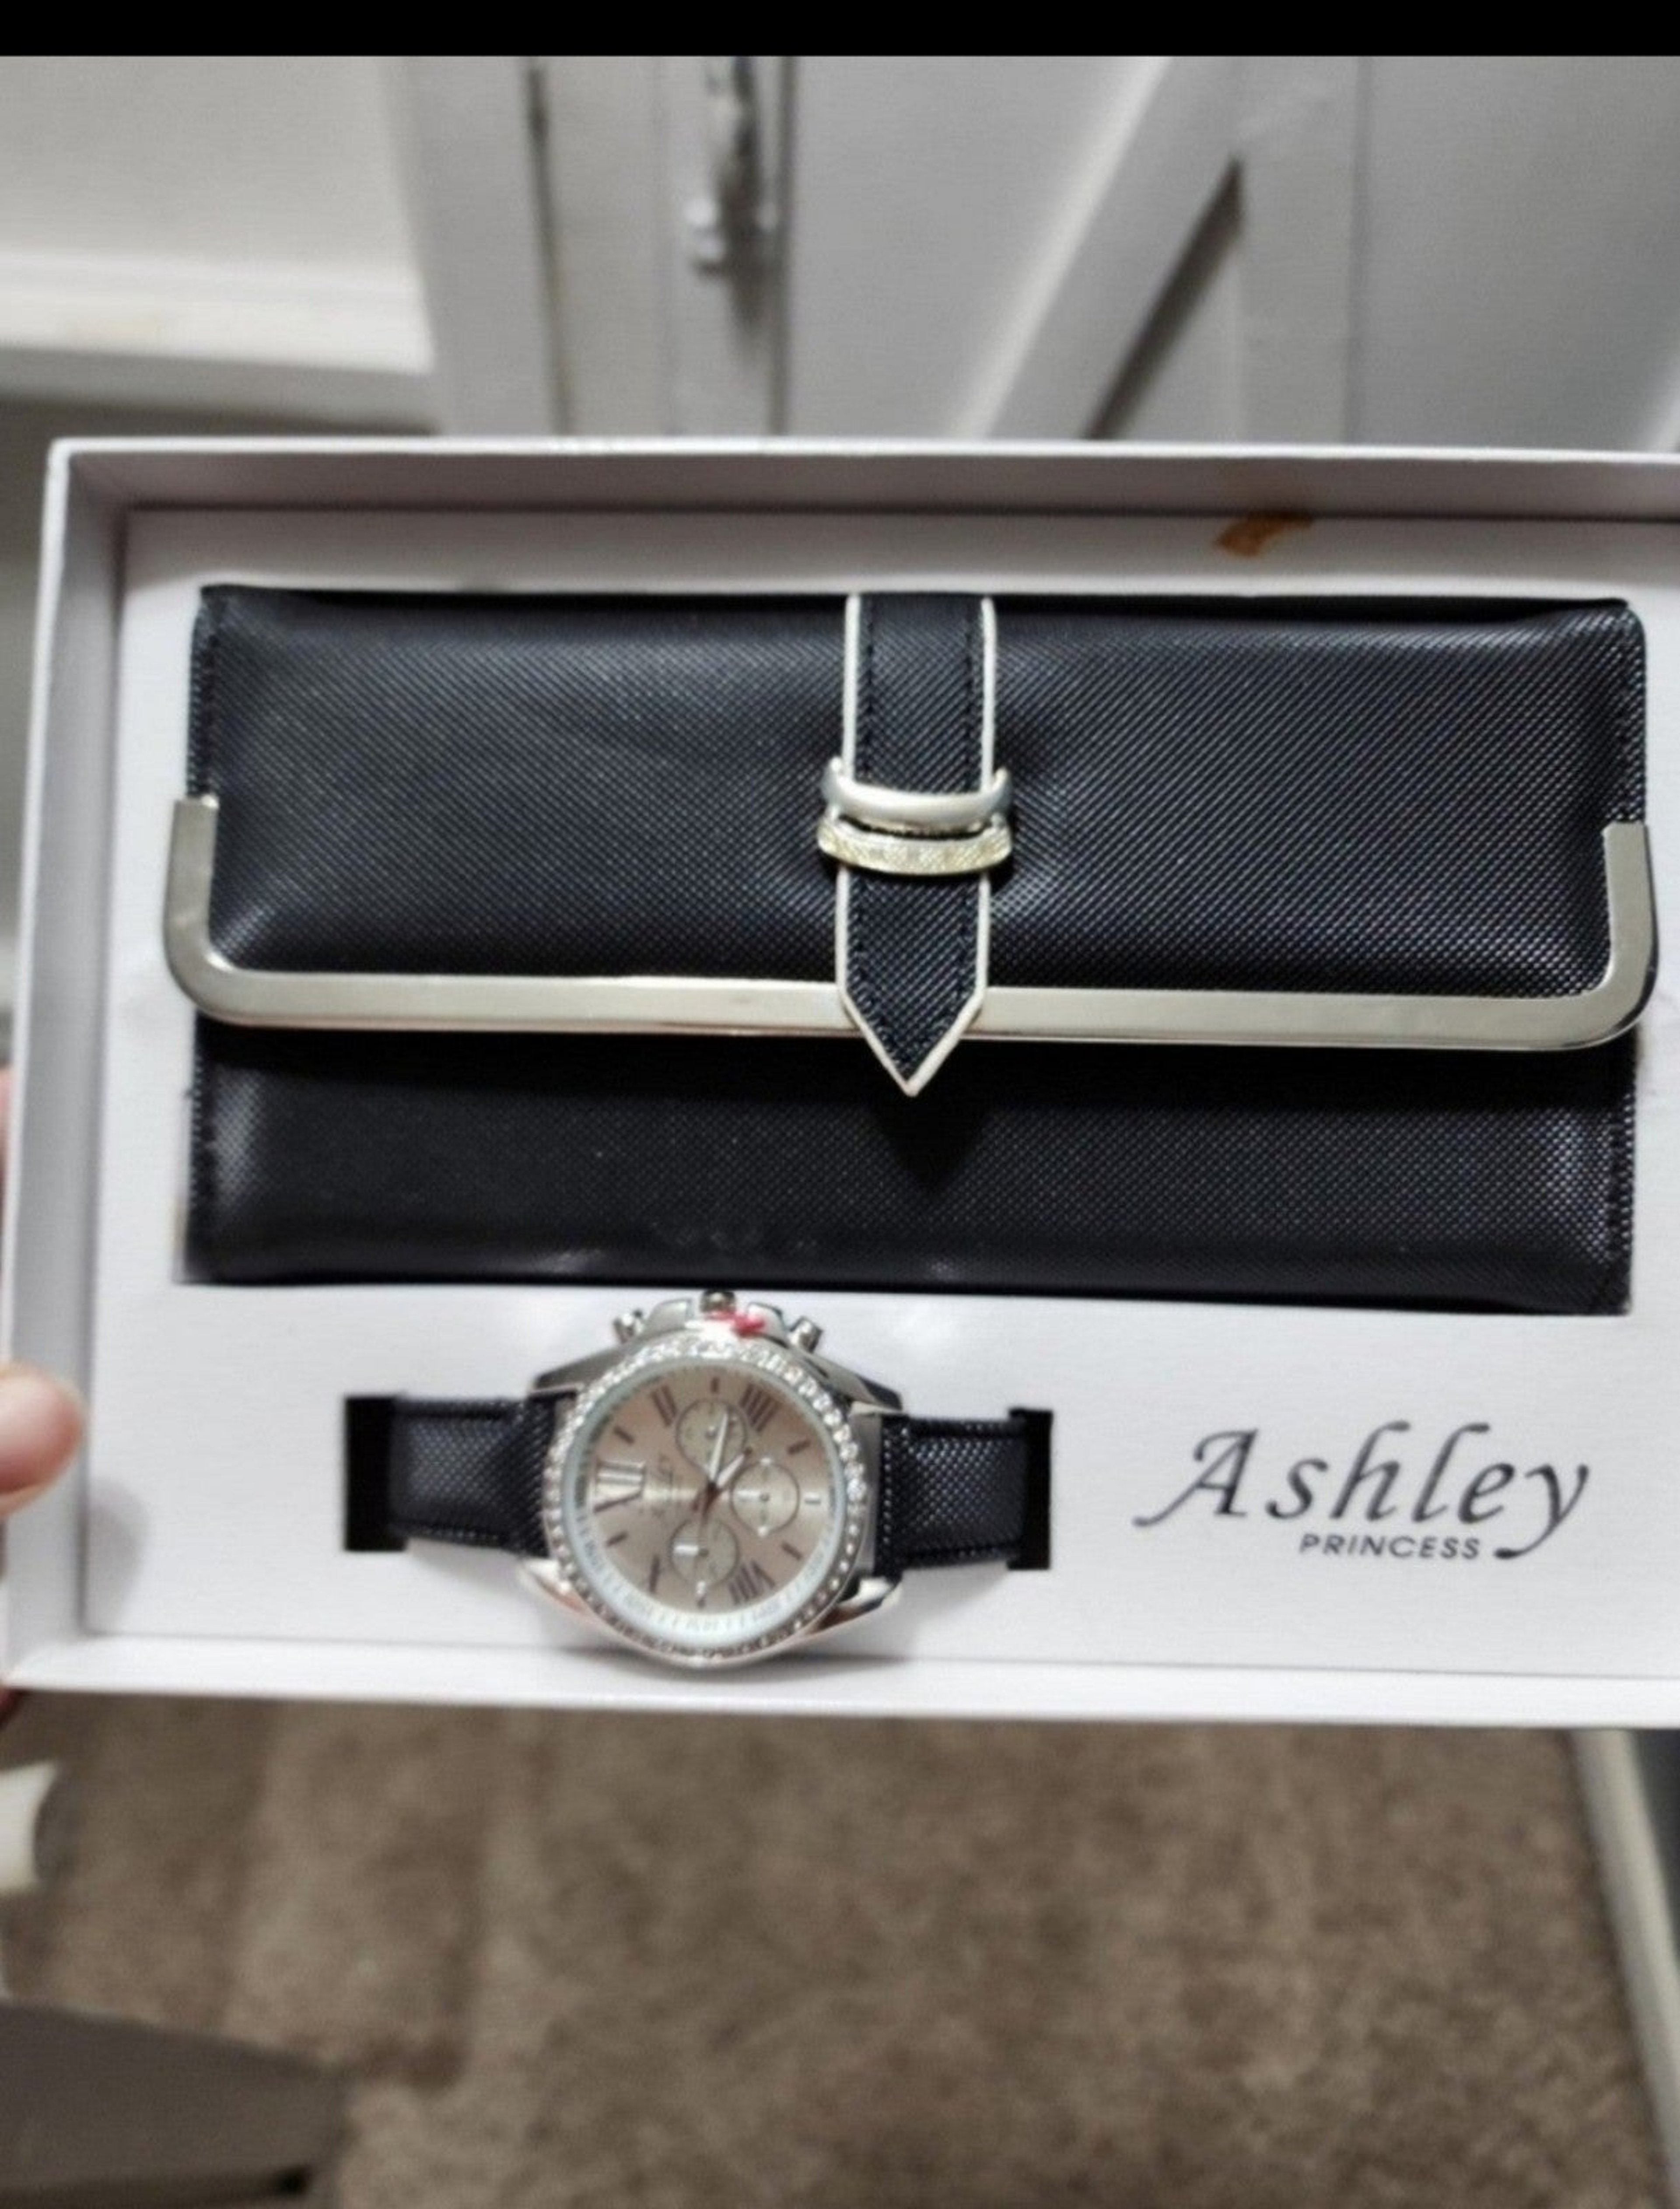 billy pointer recommends Ashley Princess Watches